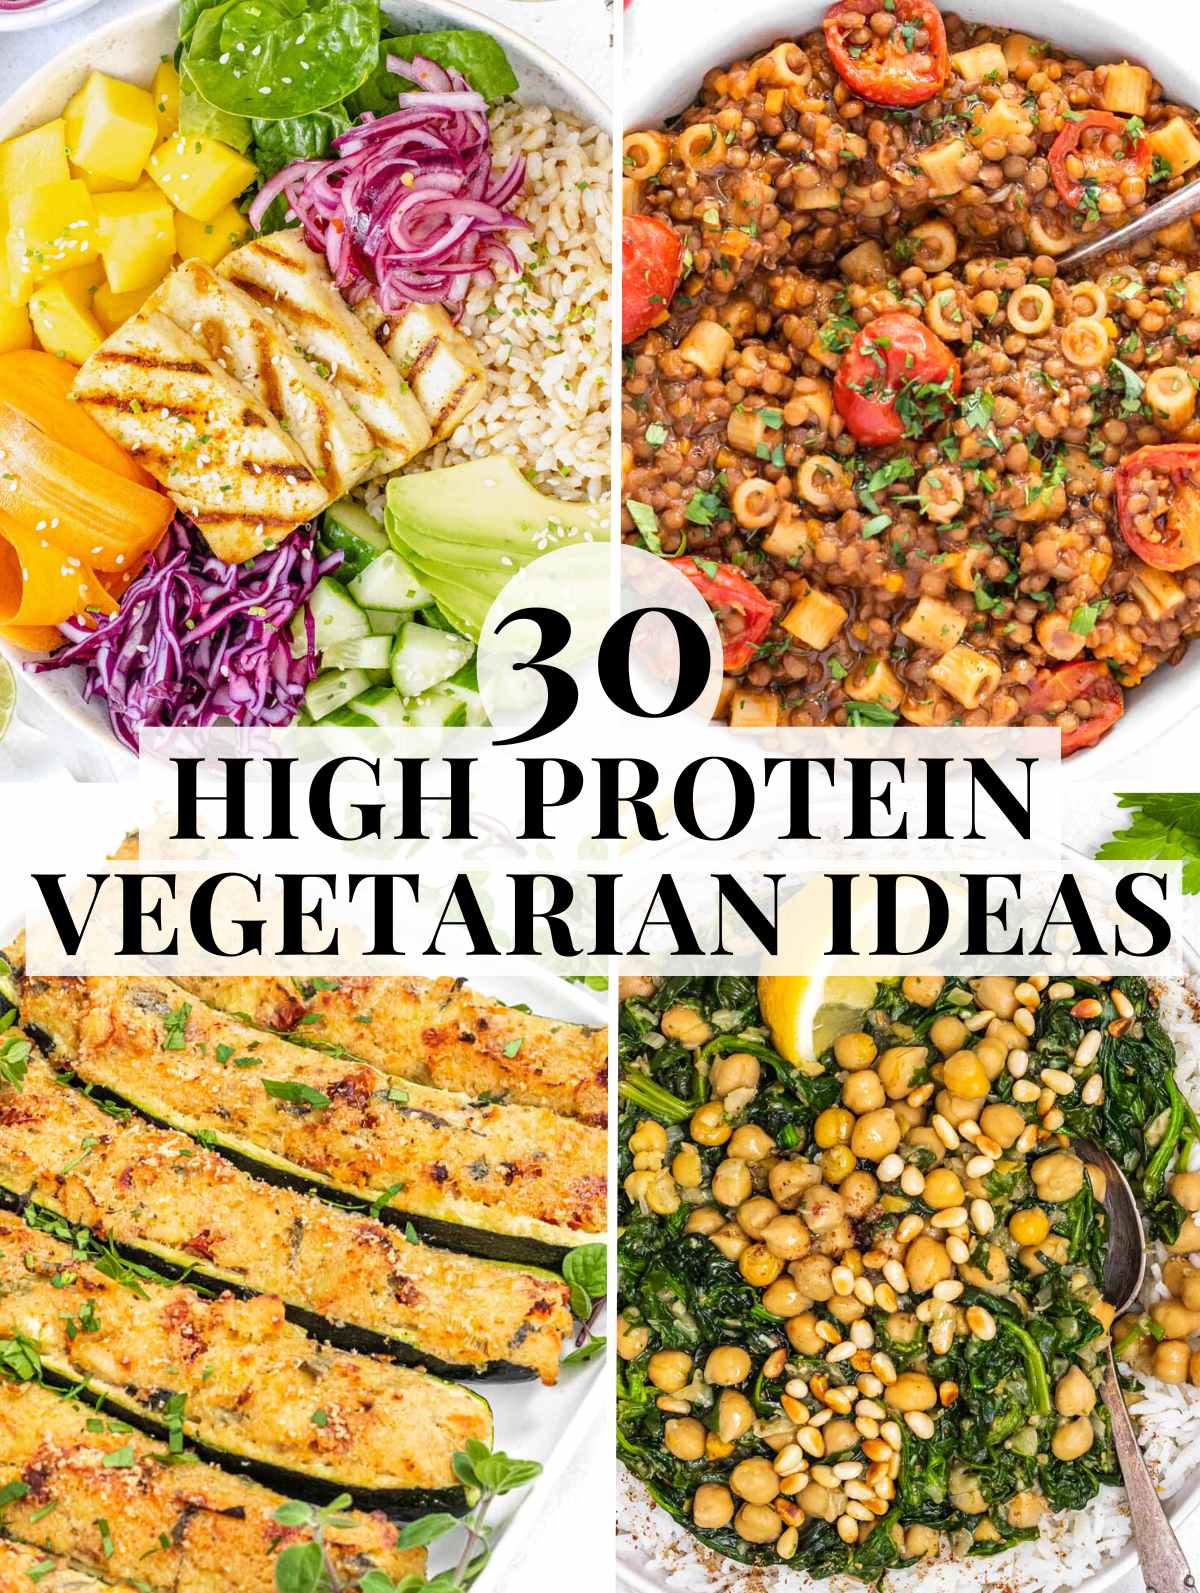 Delicious High Protein Vegetarian Recipes for Weight Loss